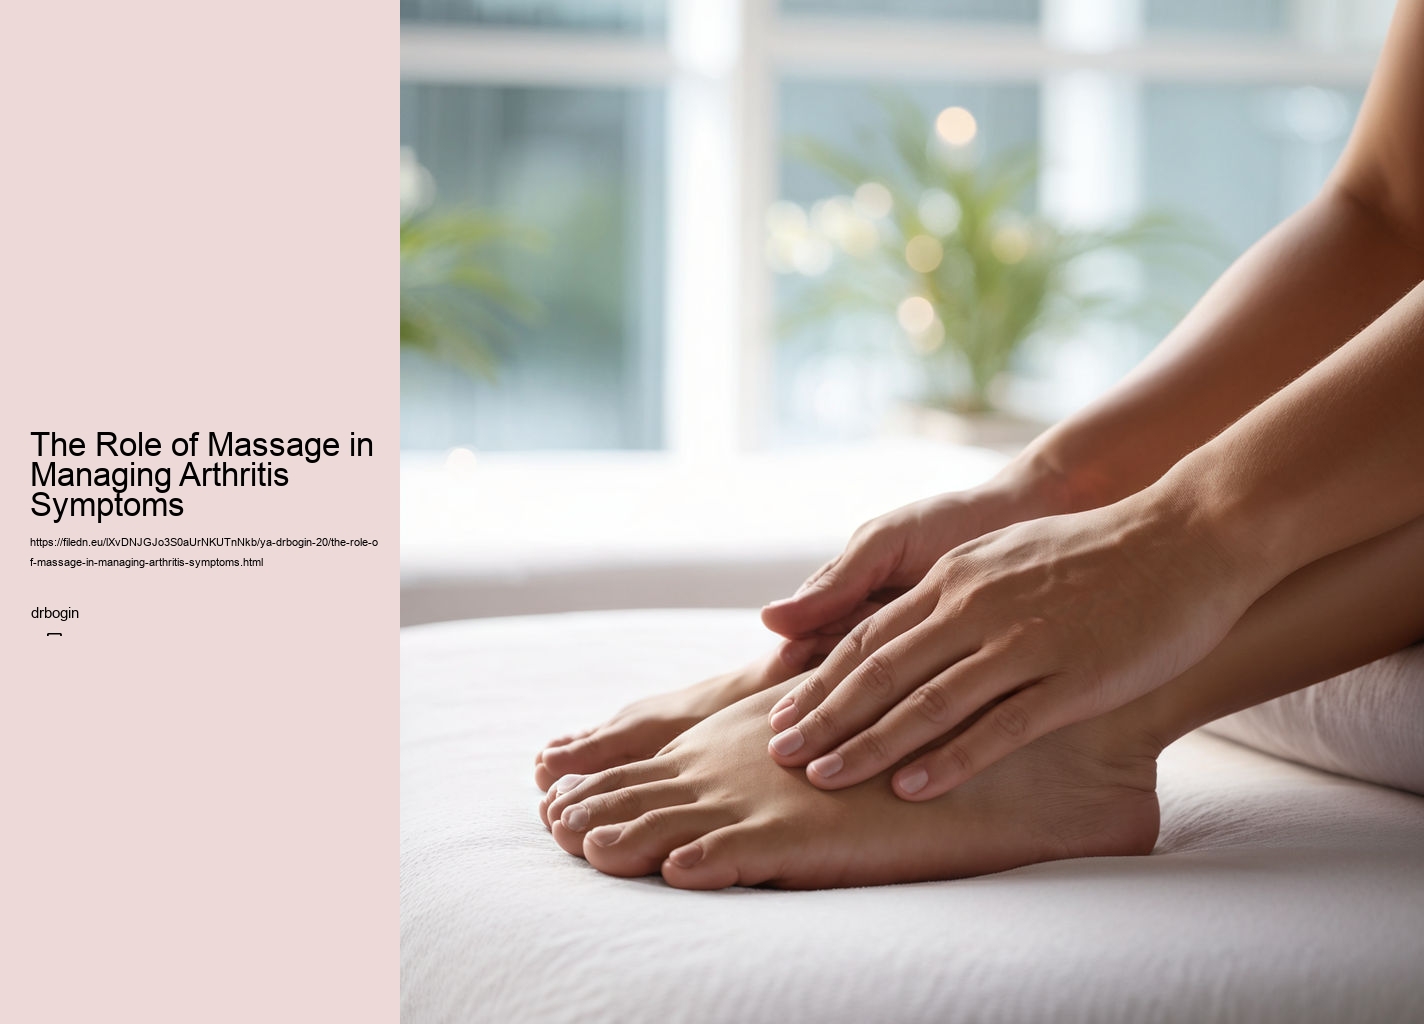 The Role of Massage in Managing Arthritis Symptoms